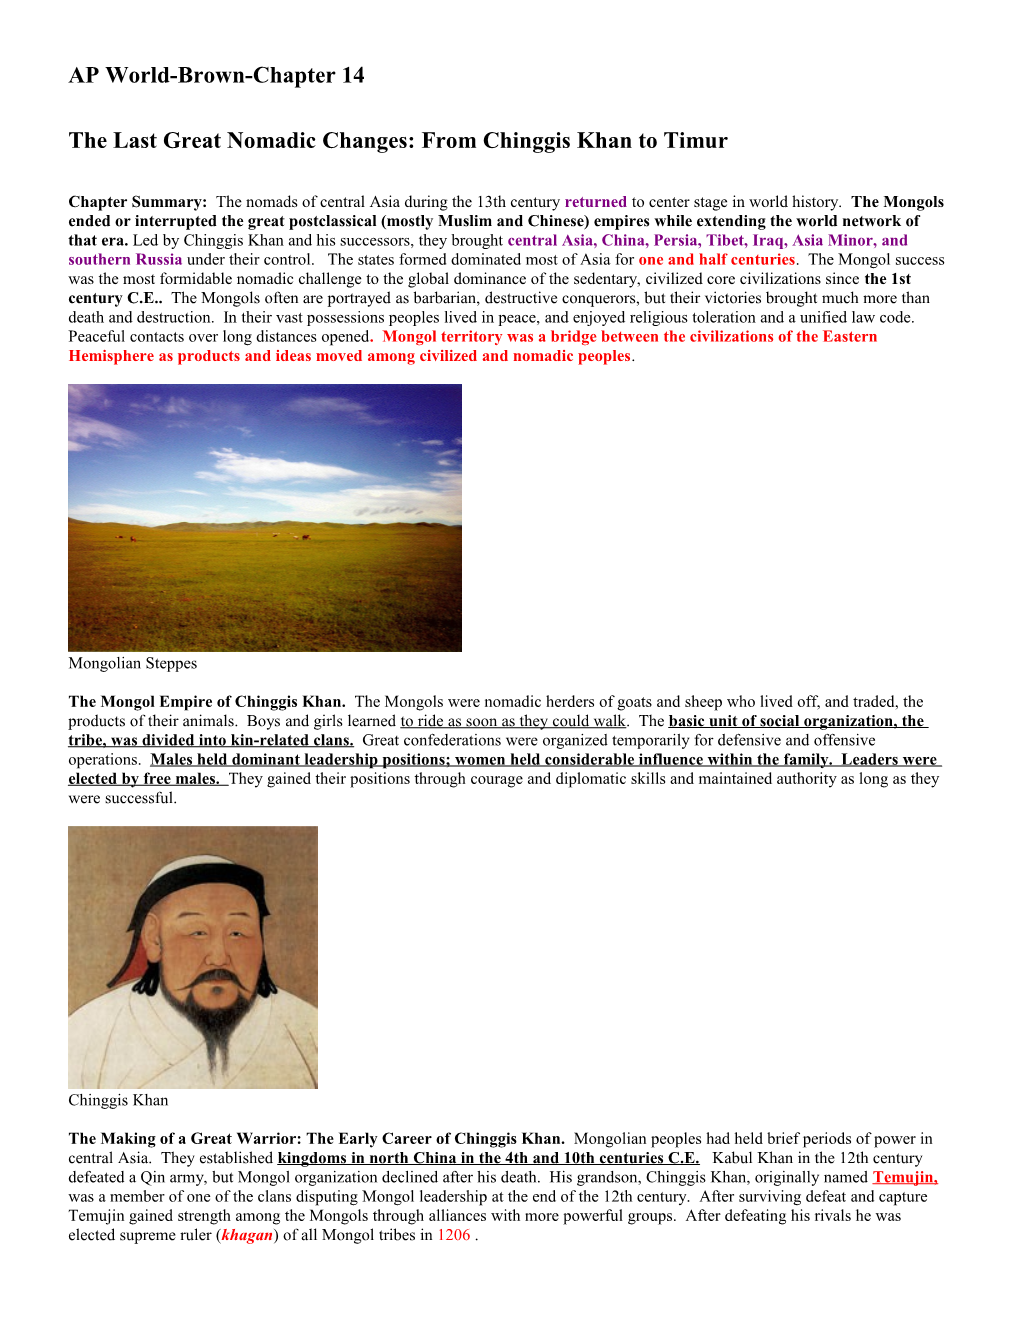 The Last Great Nomadic Changes: from Chinggis Khan to Timur